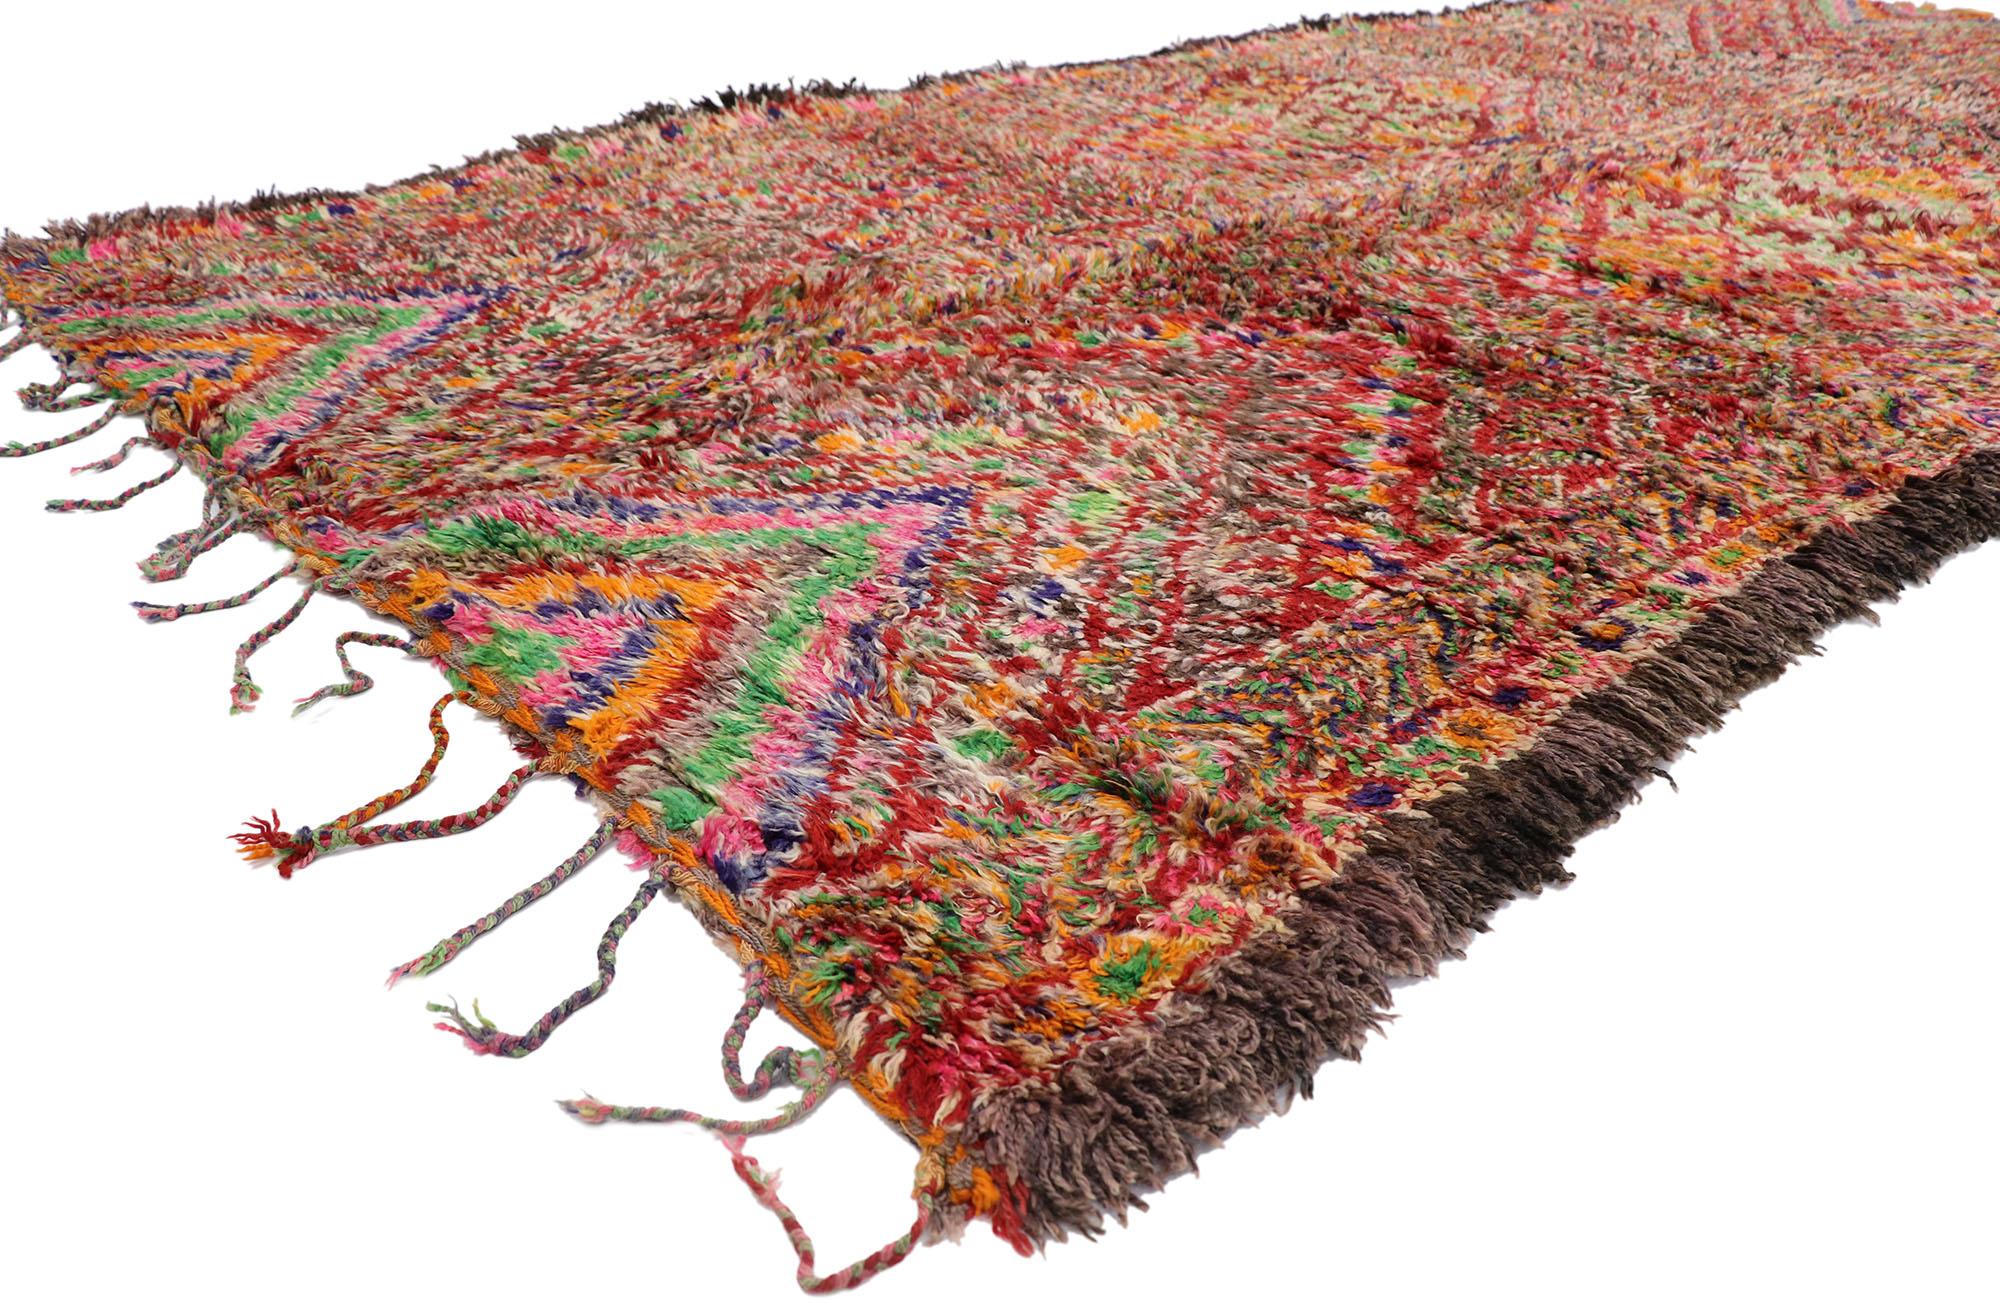 21210 Vintage Berber Beni M'Guild Moroccan rug with Boho Chic Tribal Style 06'02 x 12'09. Showcasing a bold expressive design, incredible detail and texture, this hand knotted wool vintage Berber Beni M'Guild Moroccan rug is a captivating vision of